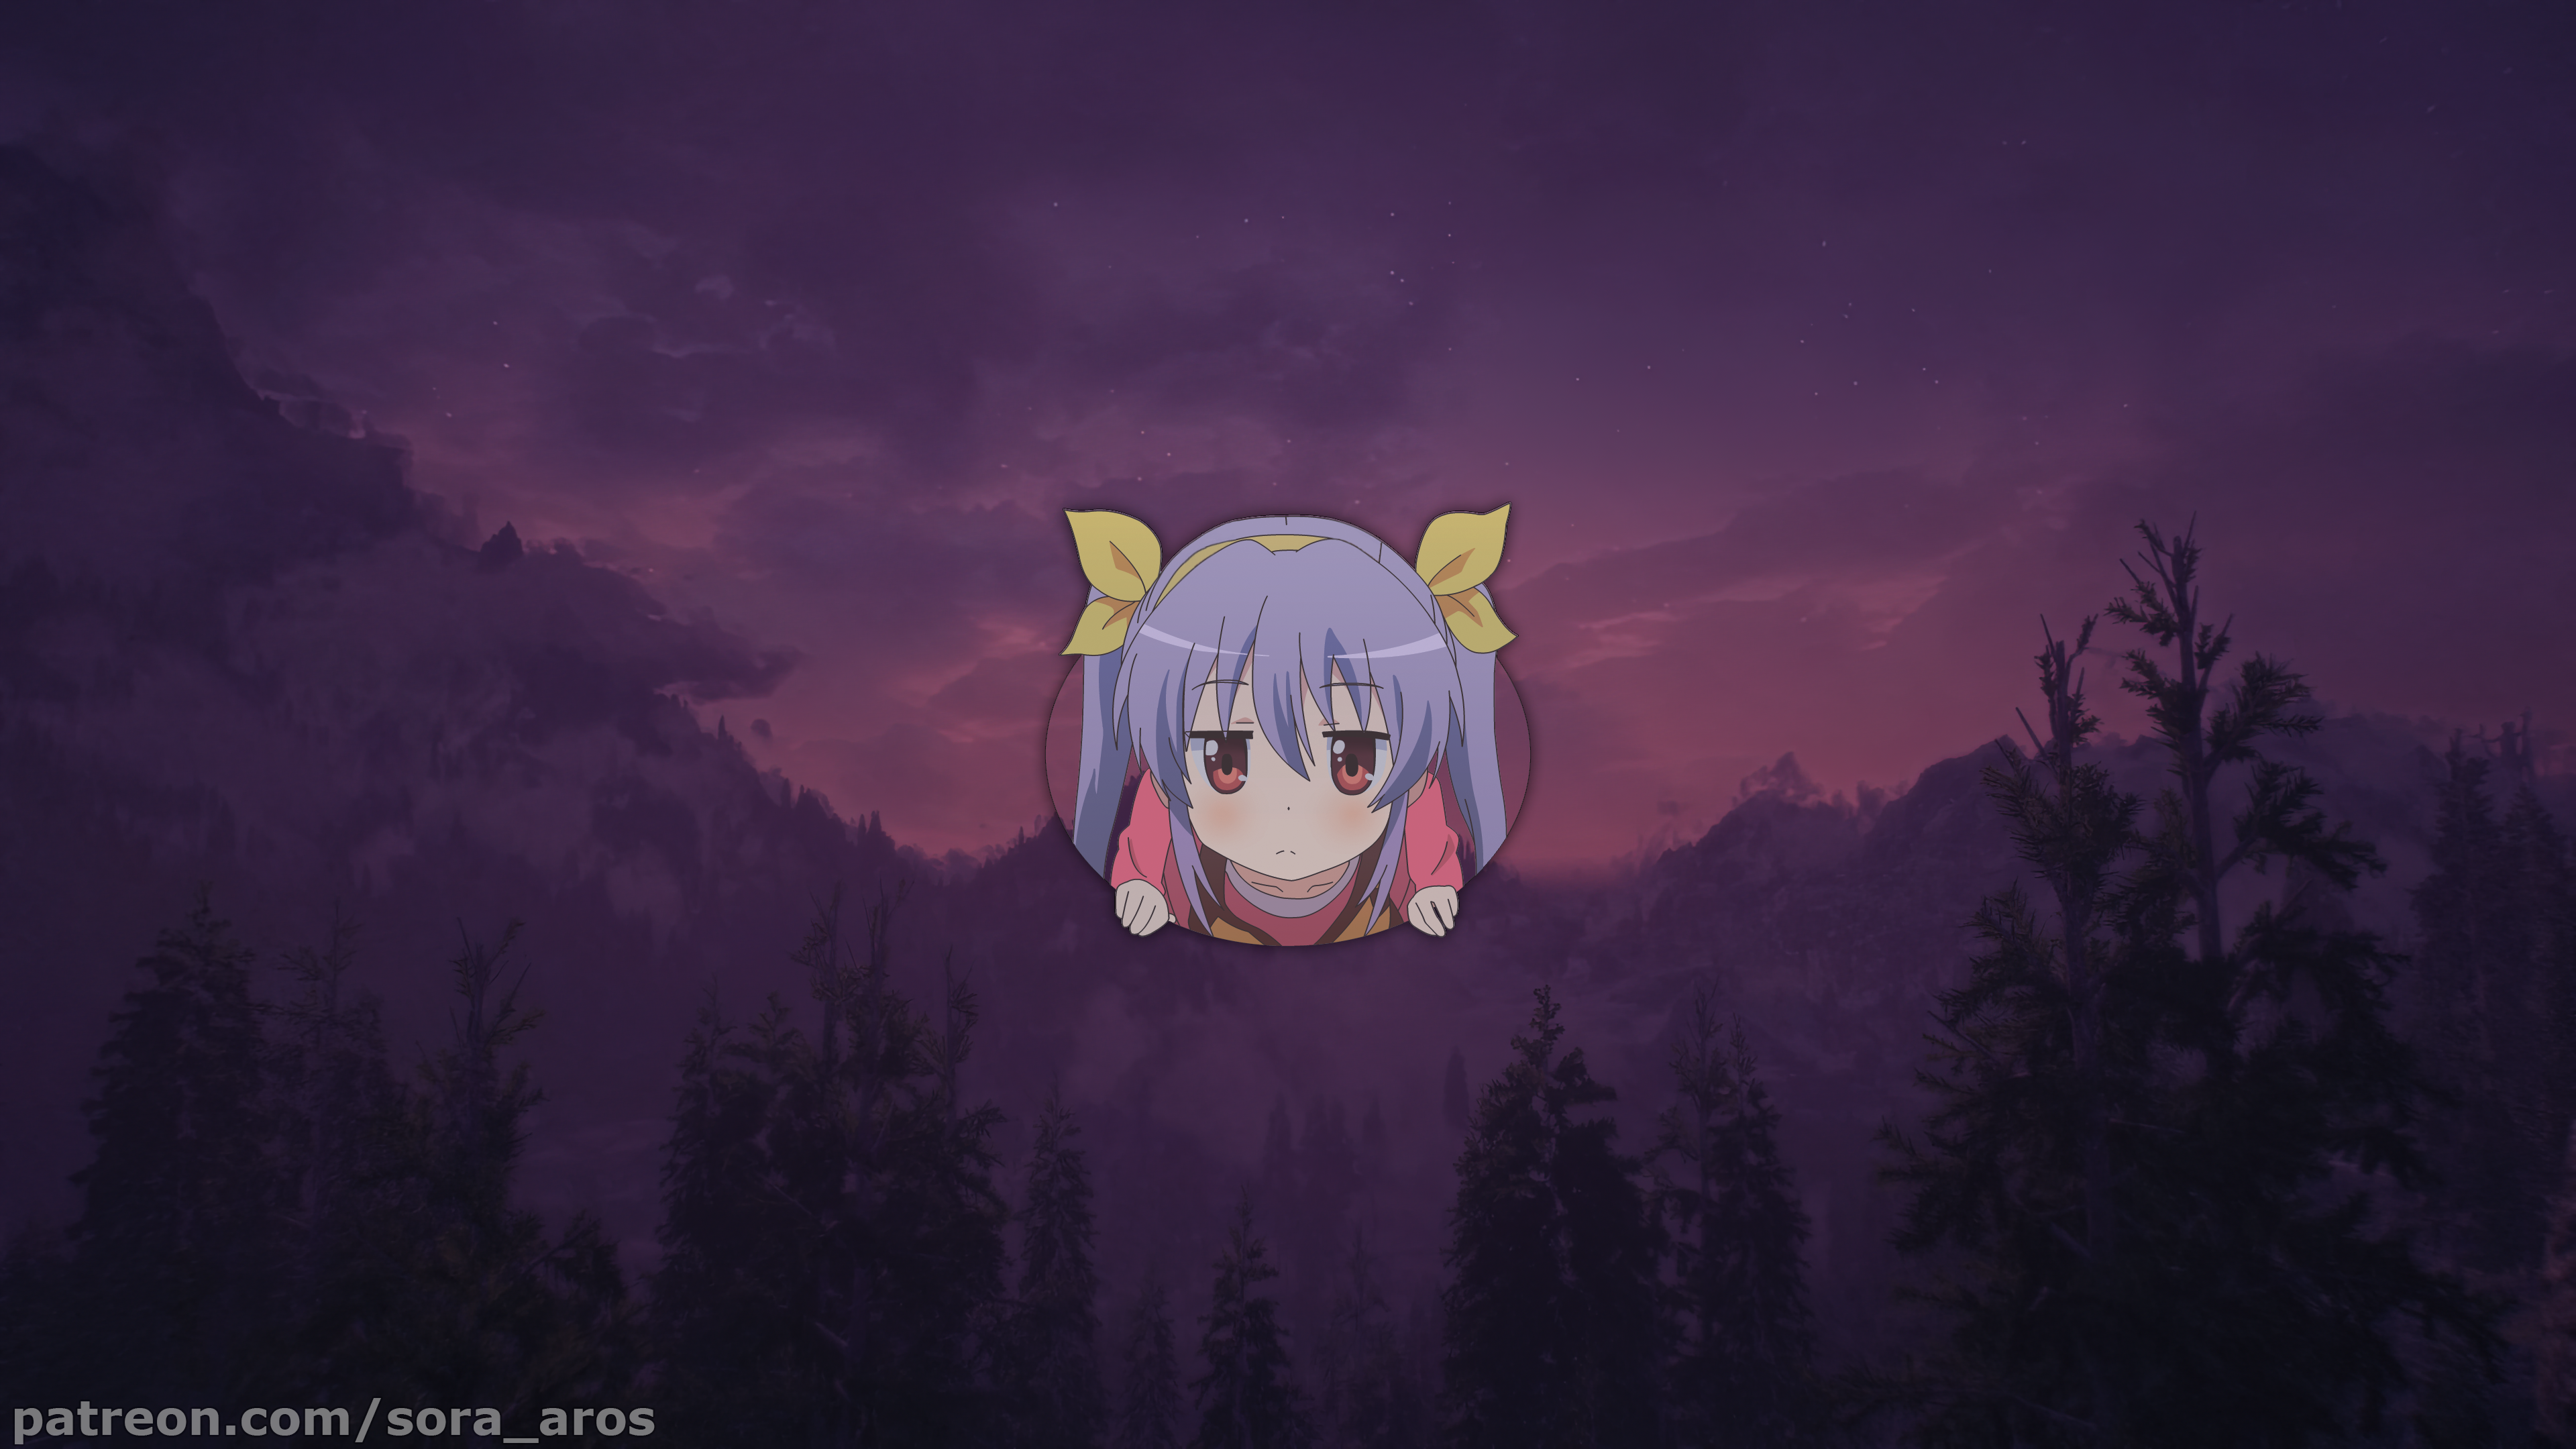 Anime 3840x2160 Non Non Biyori anime anime girls picture-in-picture forest sunset